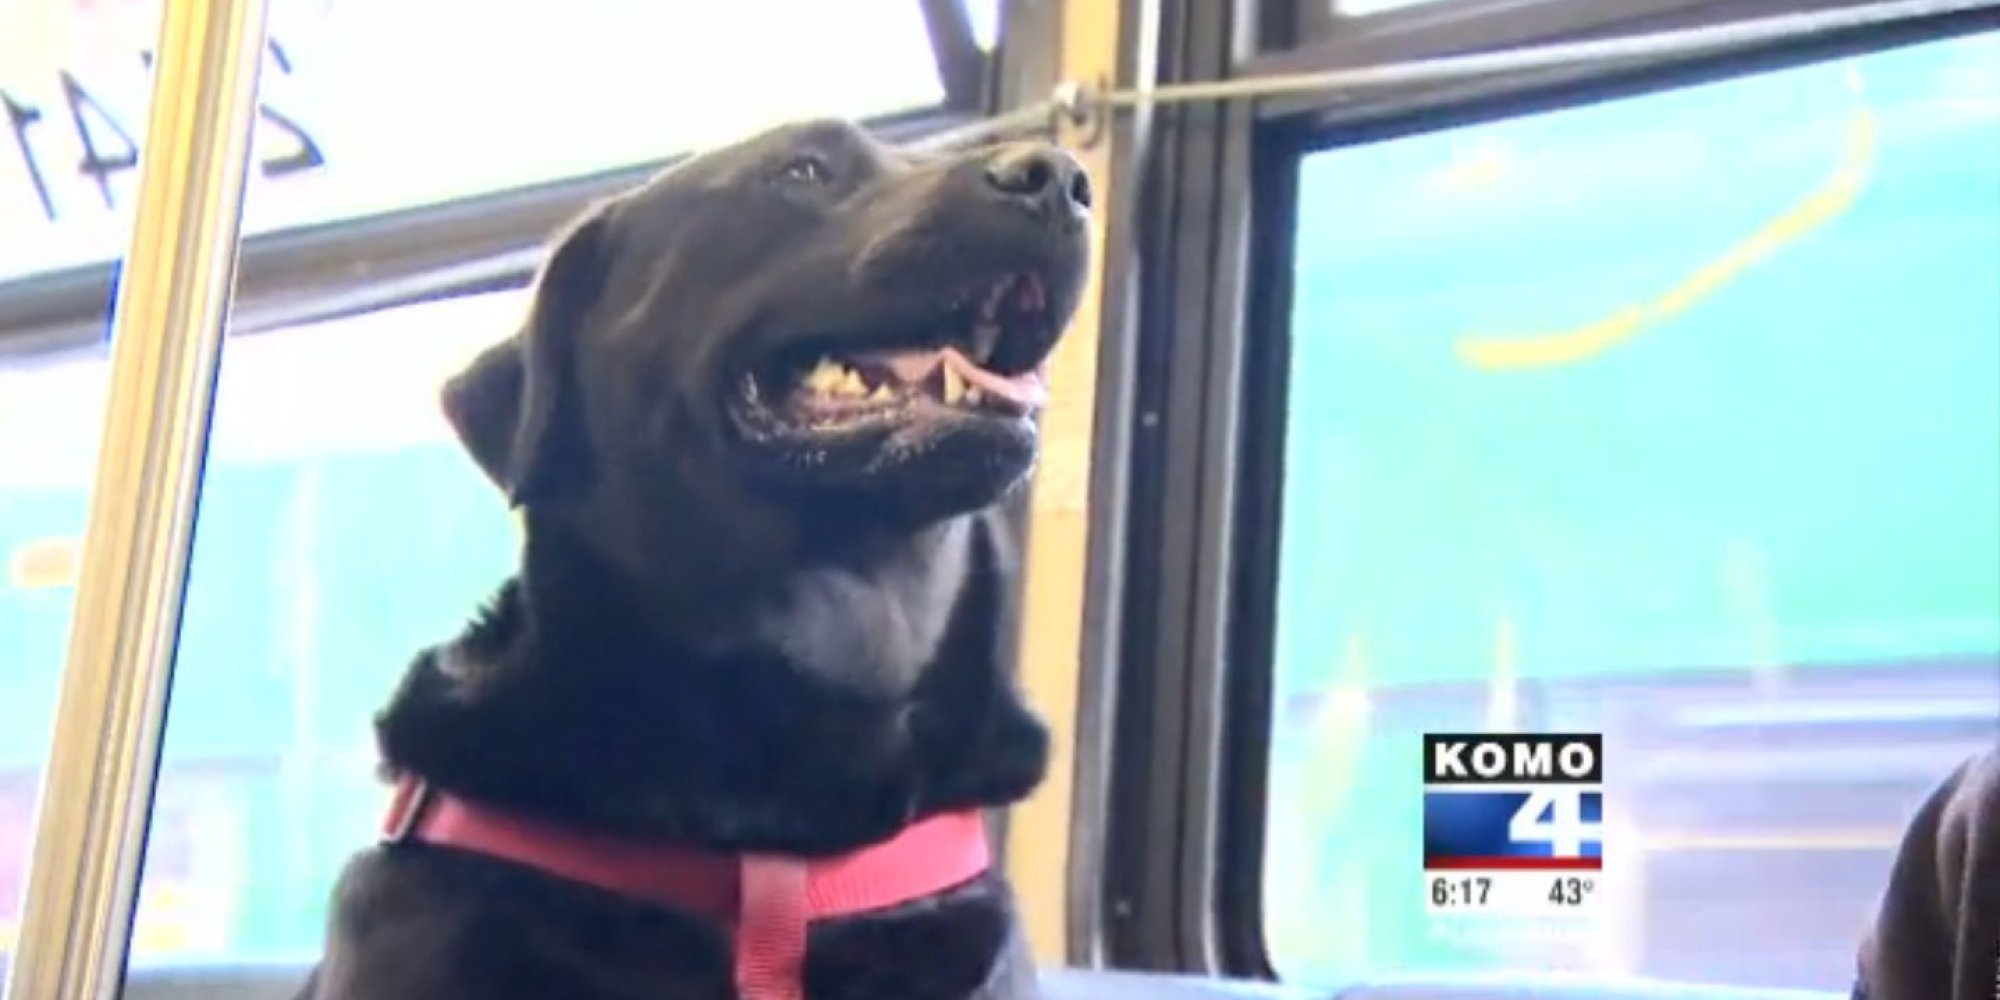 Seattle Dog Figures Out Buses, Starts Riding Solo To The Dog Park ...